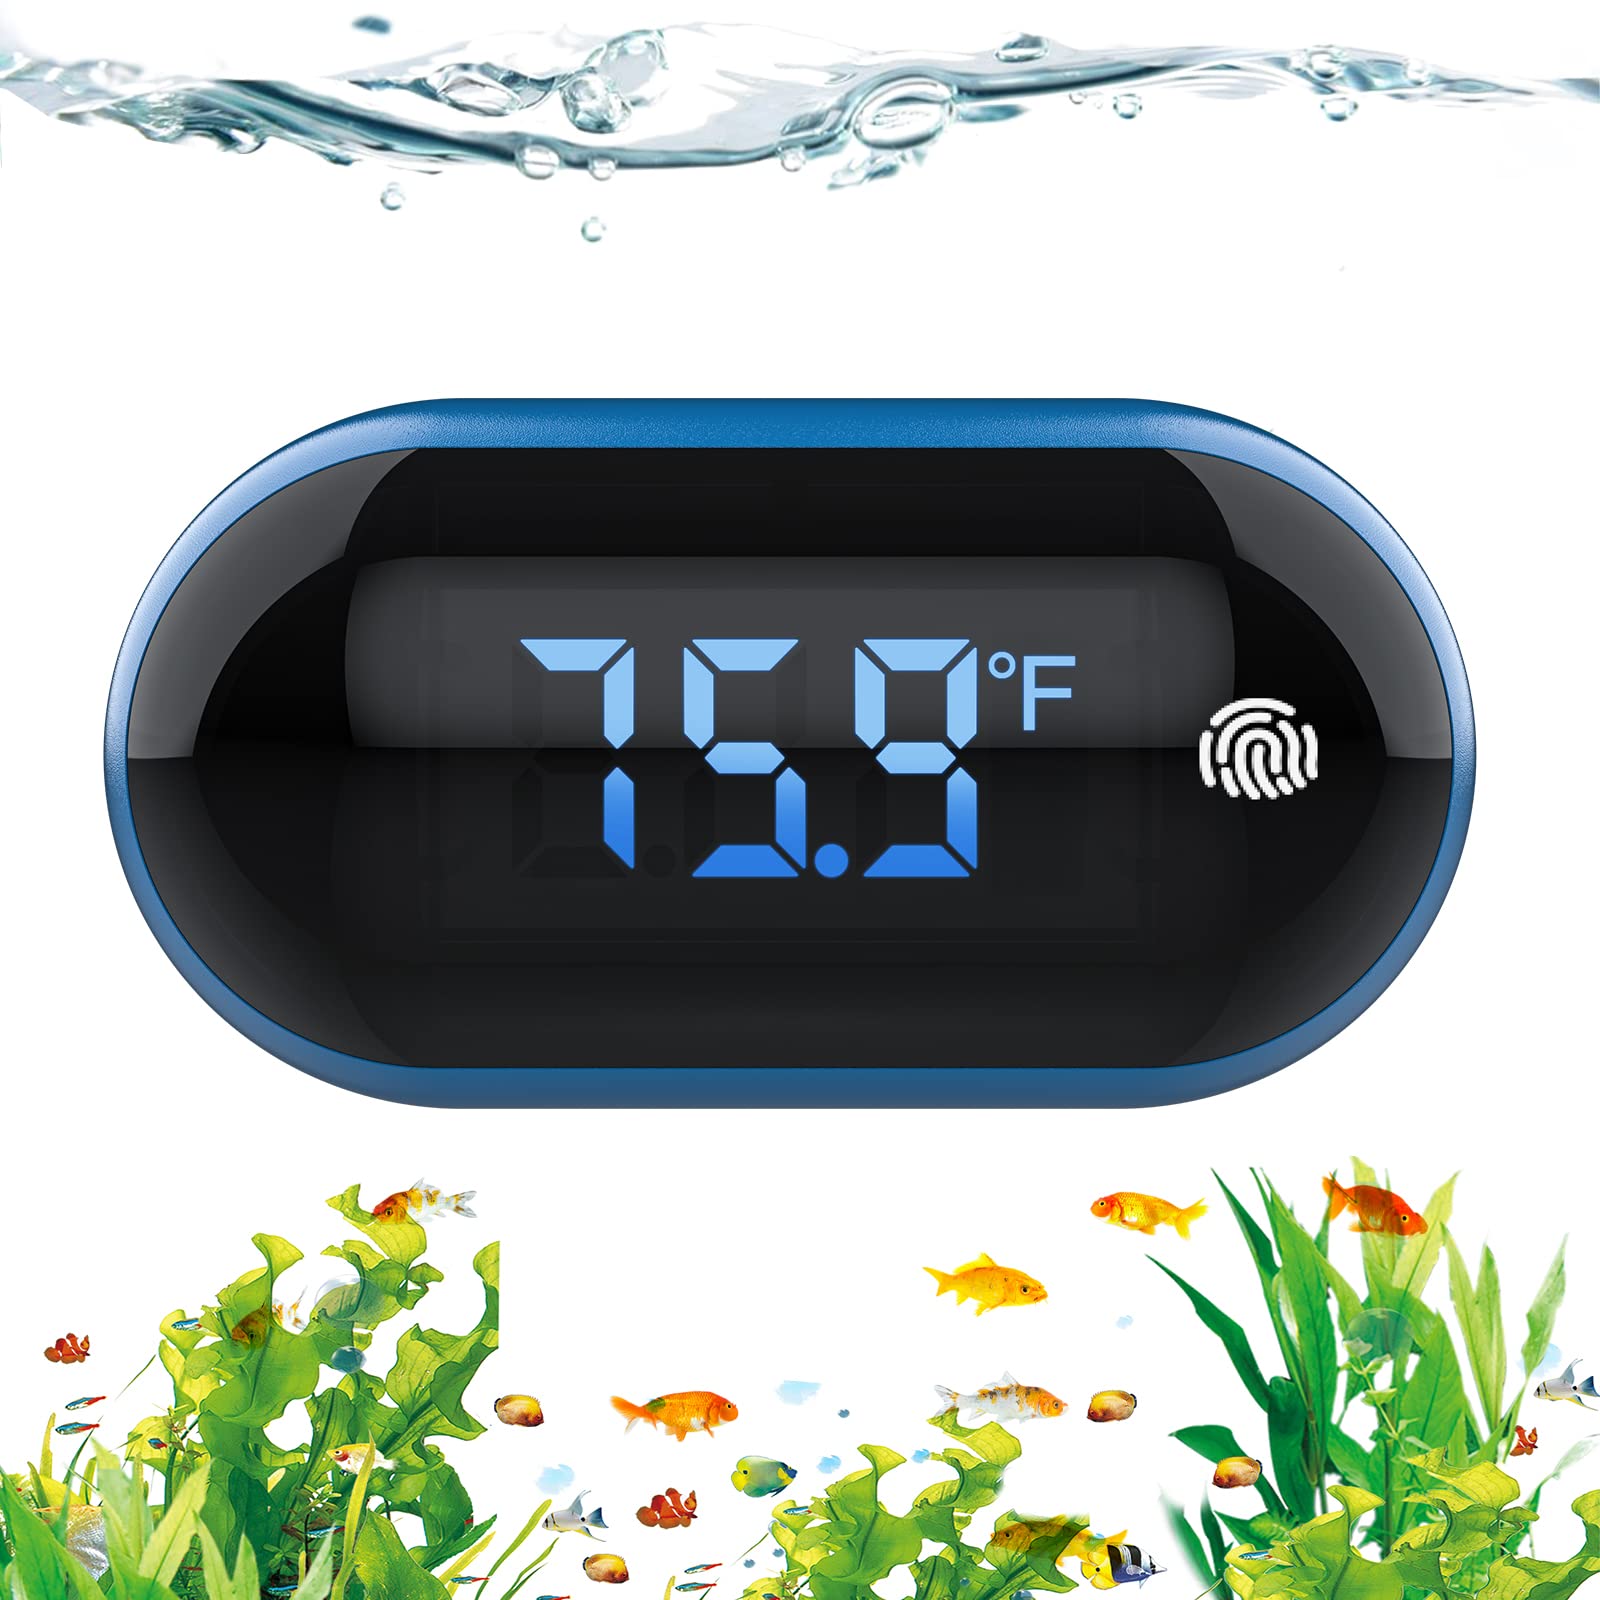 LED Fish Tank Thermometer, PAIZOO Digital Aquarium Thermometer with Touch  Screen, Range of 32-211, Accuracy